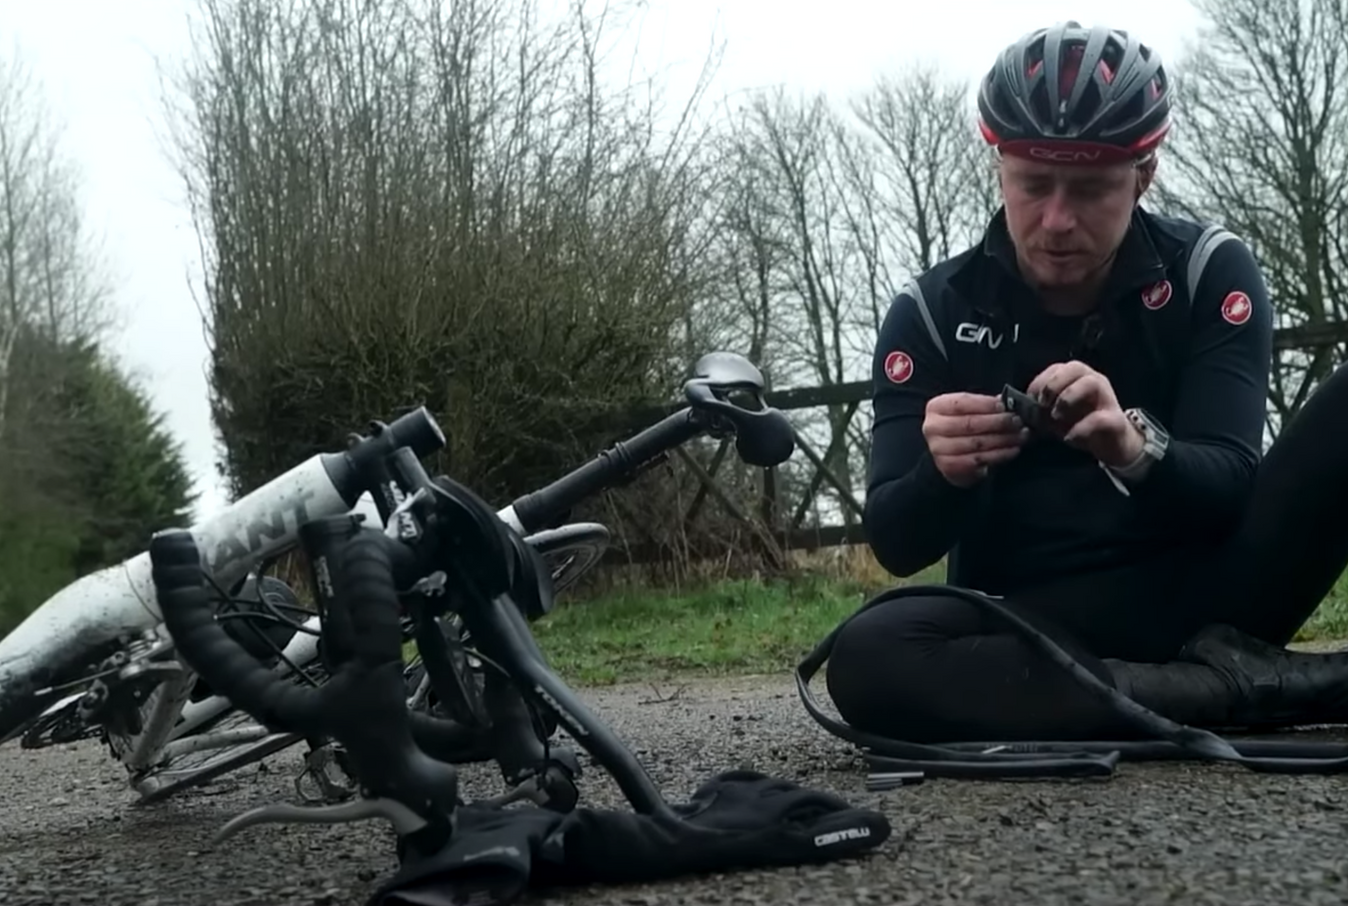 Punctures do happen and they do need repairing